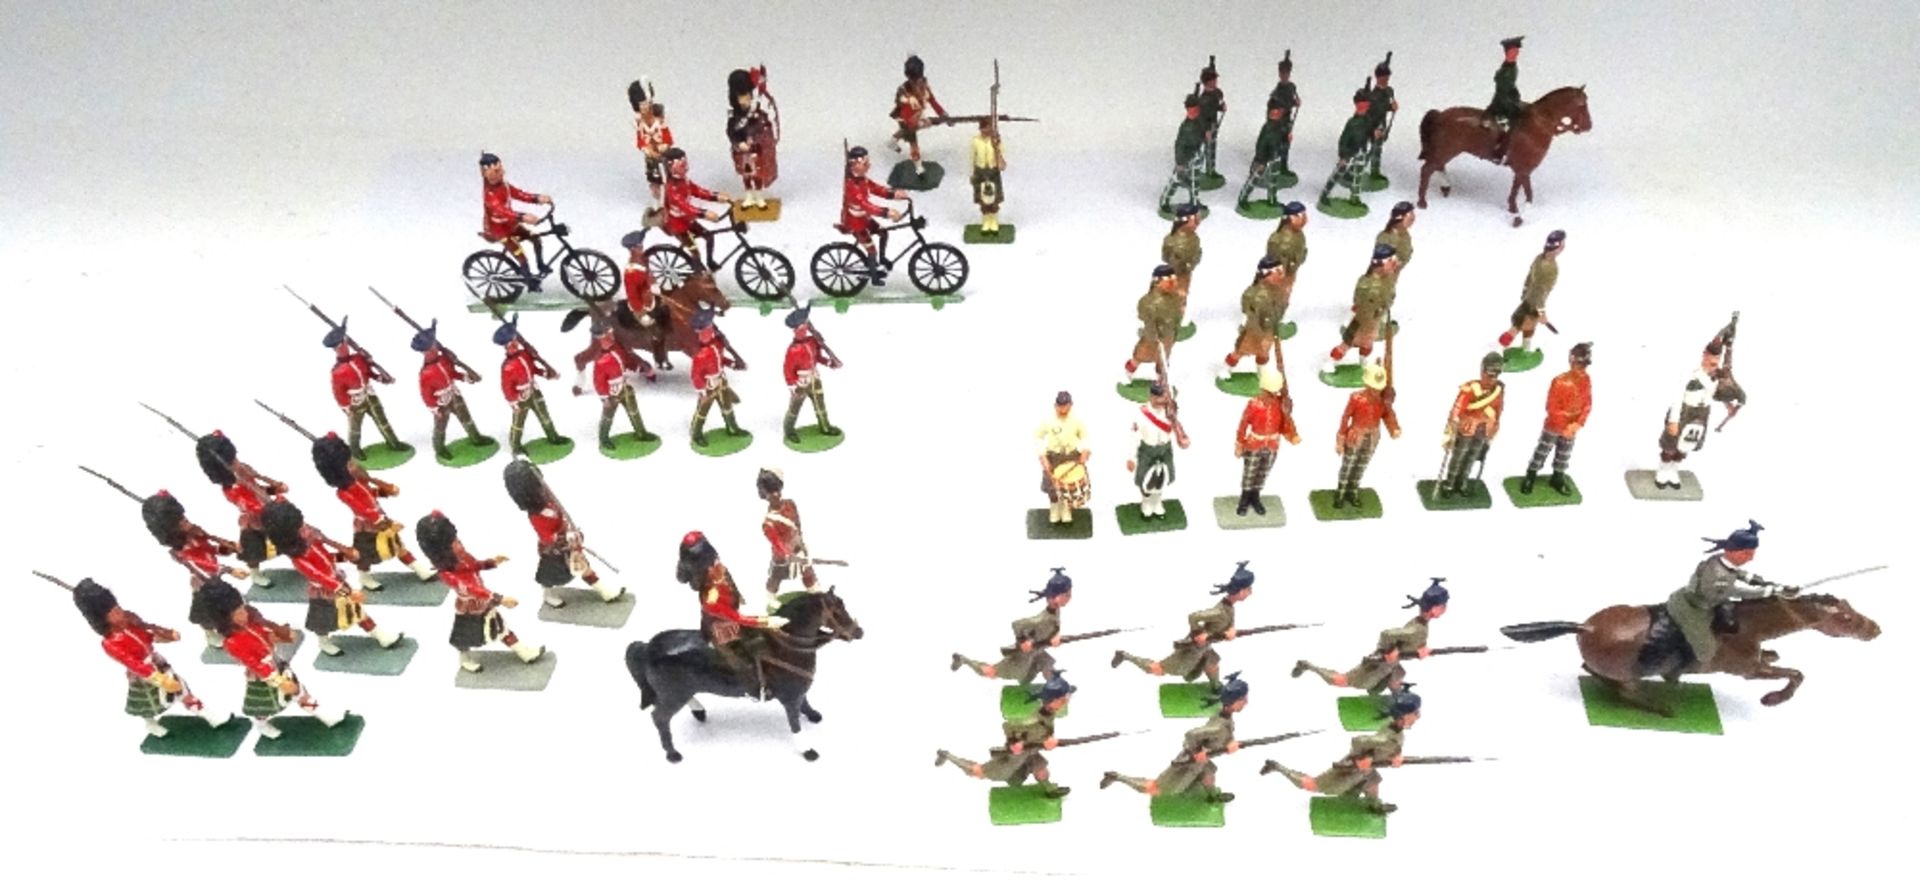 Highlander New Toy Soldiers